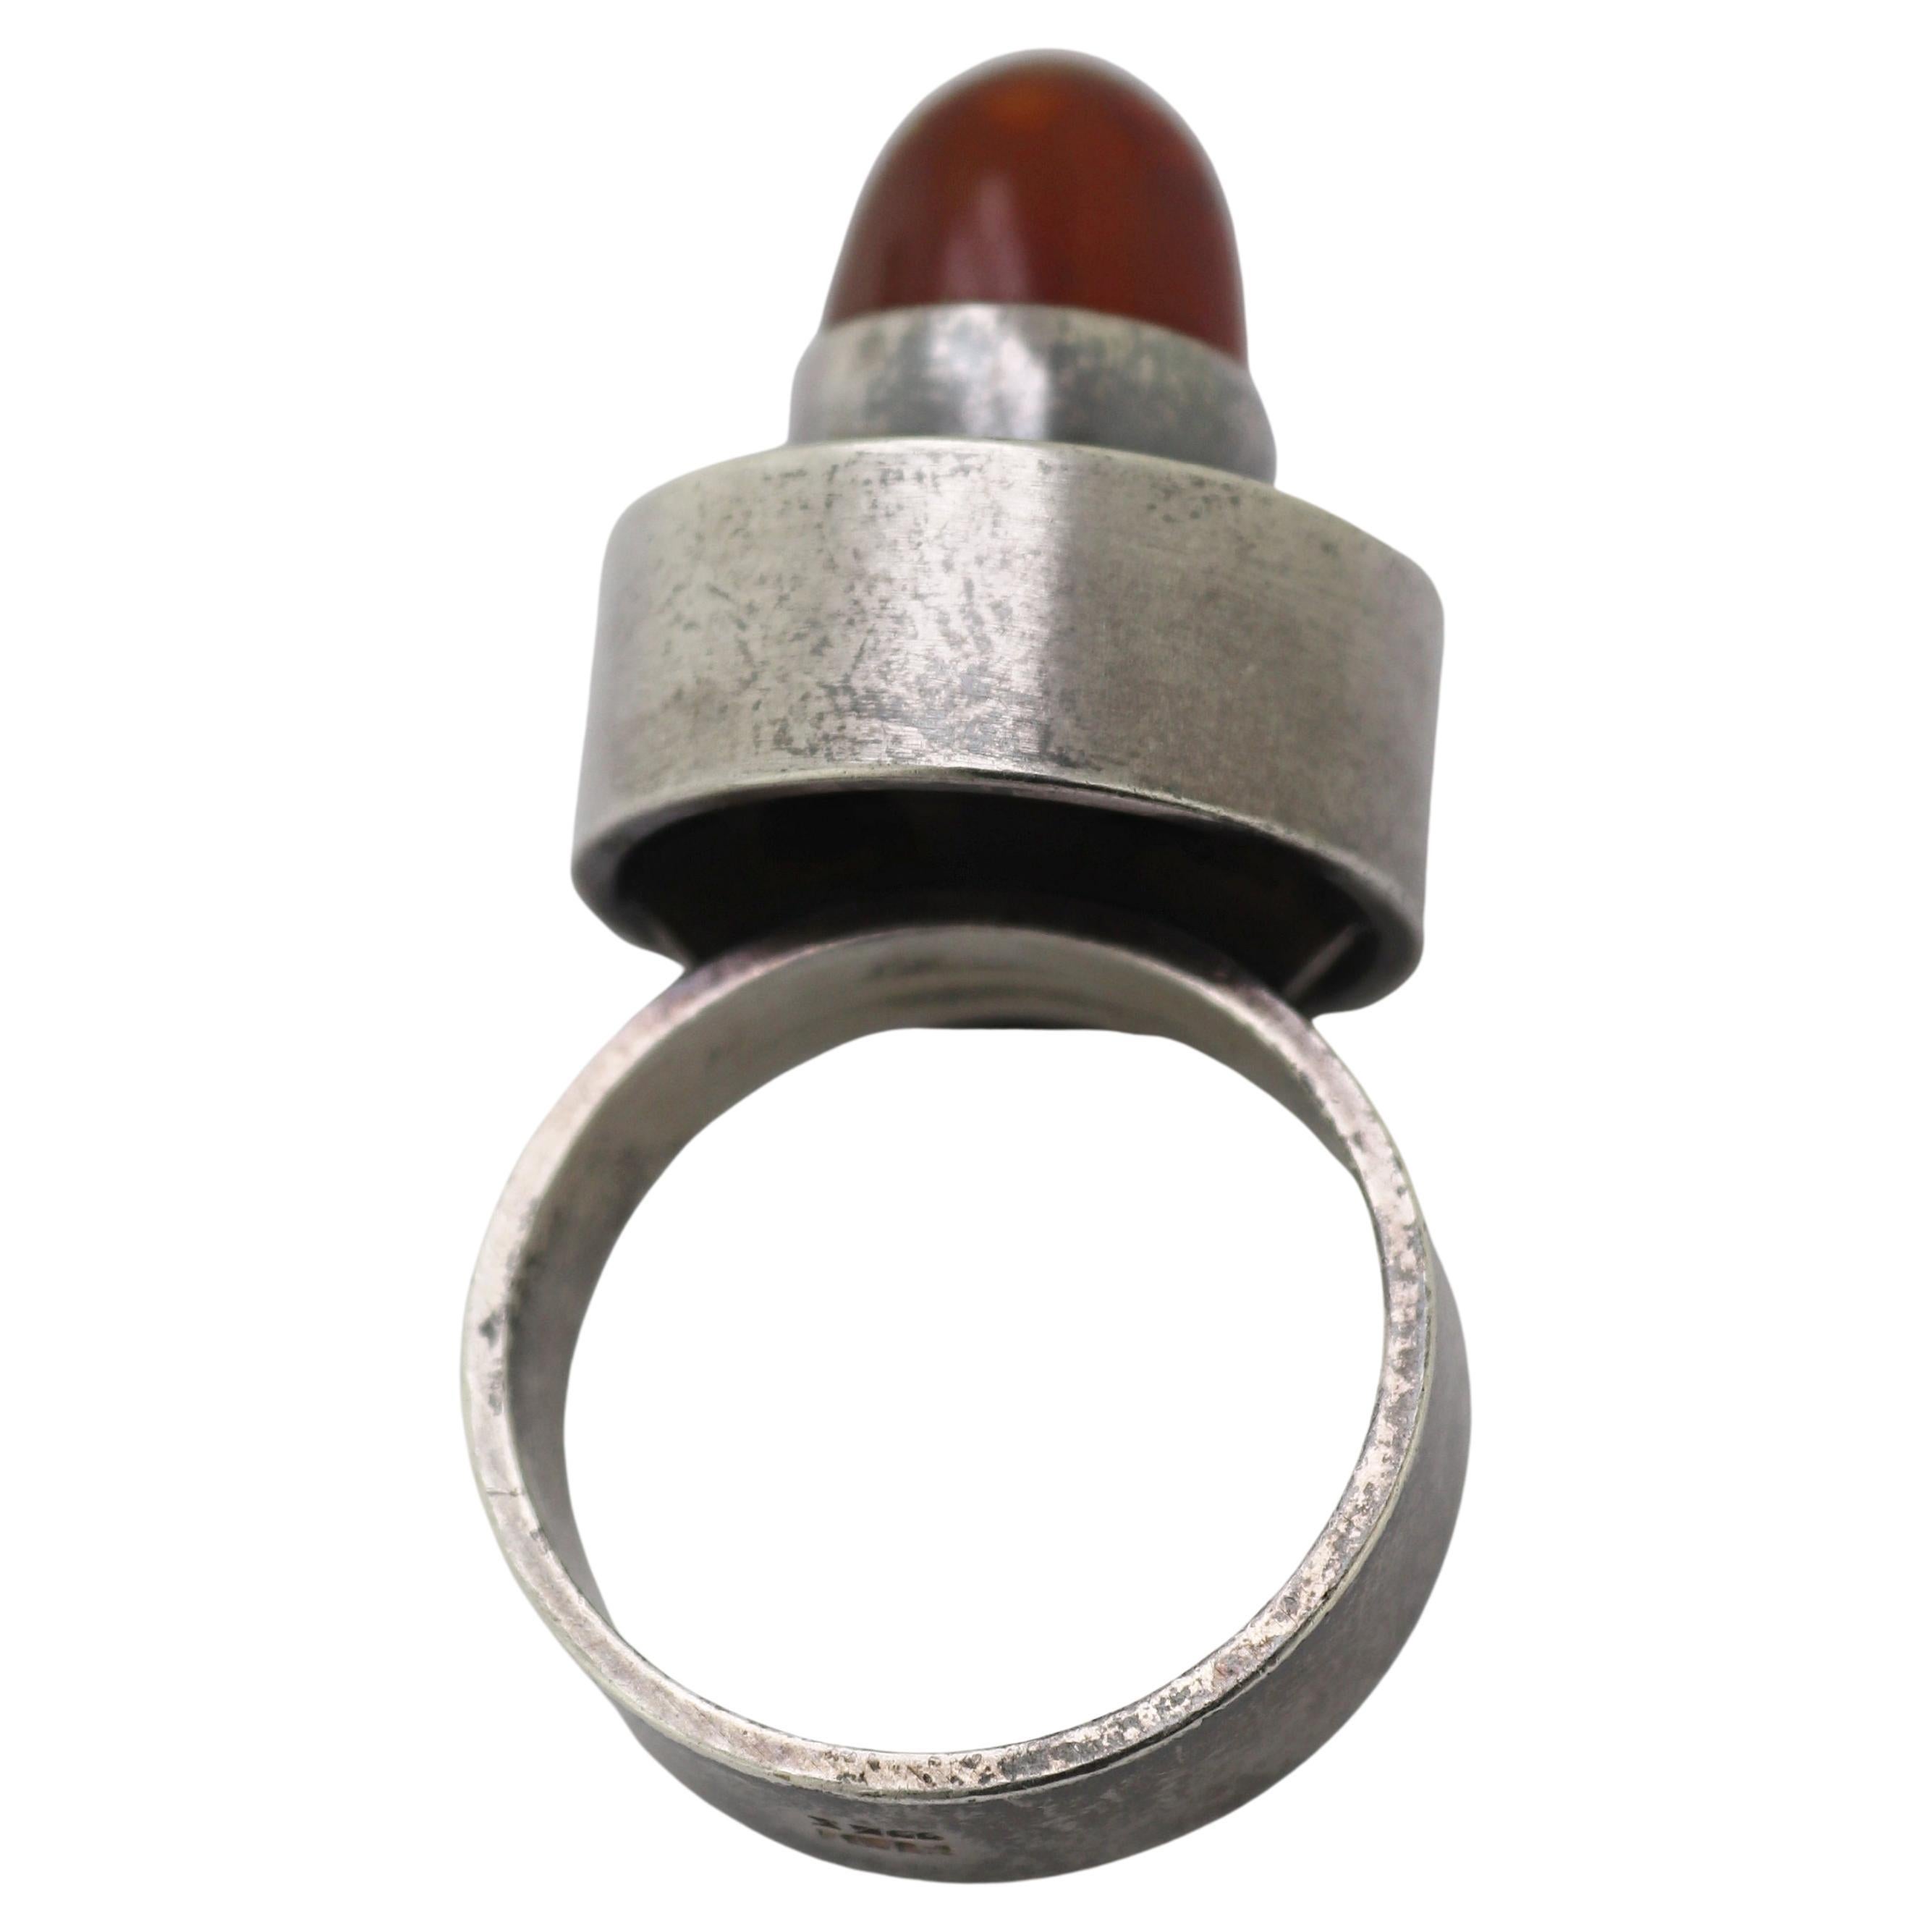 Centering one round high domed amber cabochon, 8.3 X 7.2 mm, bezel set in a sterling silver
modern geometric mounting, 16.6 X 19.1 X 7.2 mm, size: 6, marked: FROM 925S, Gross
Weight: 9.97 grams.